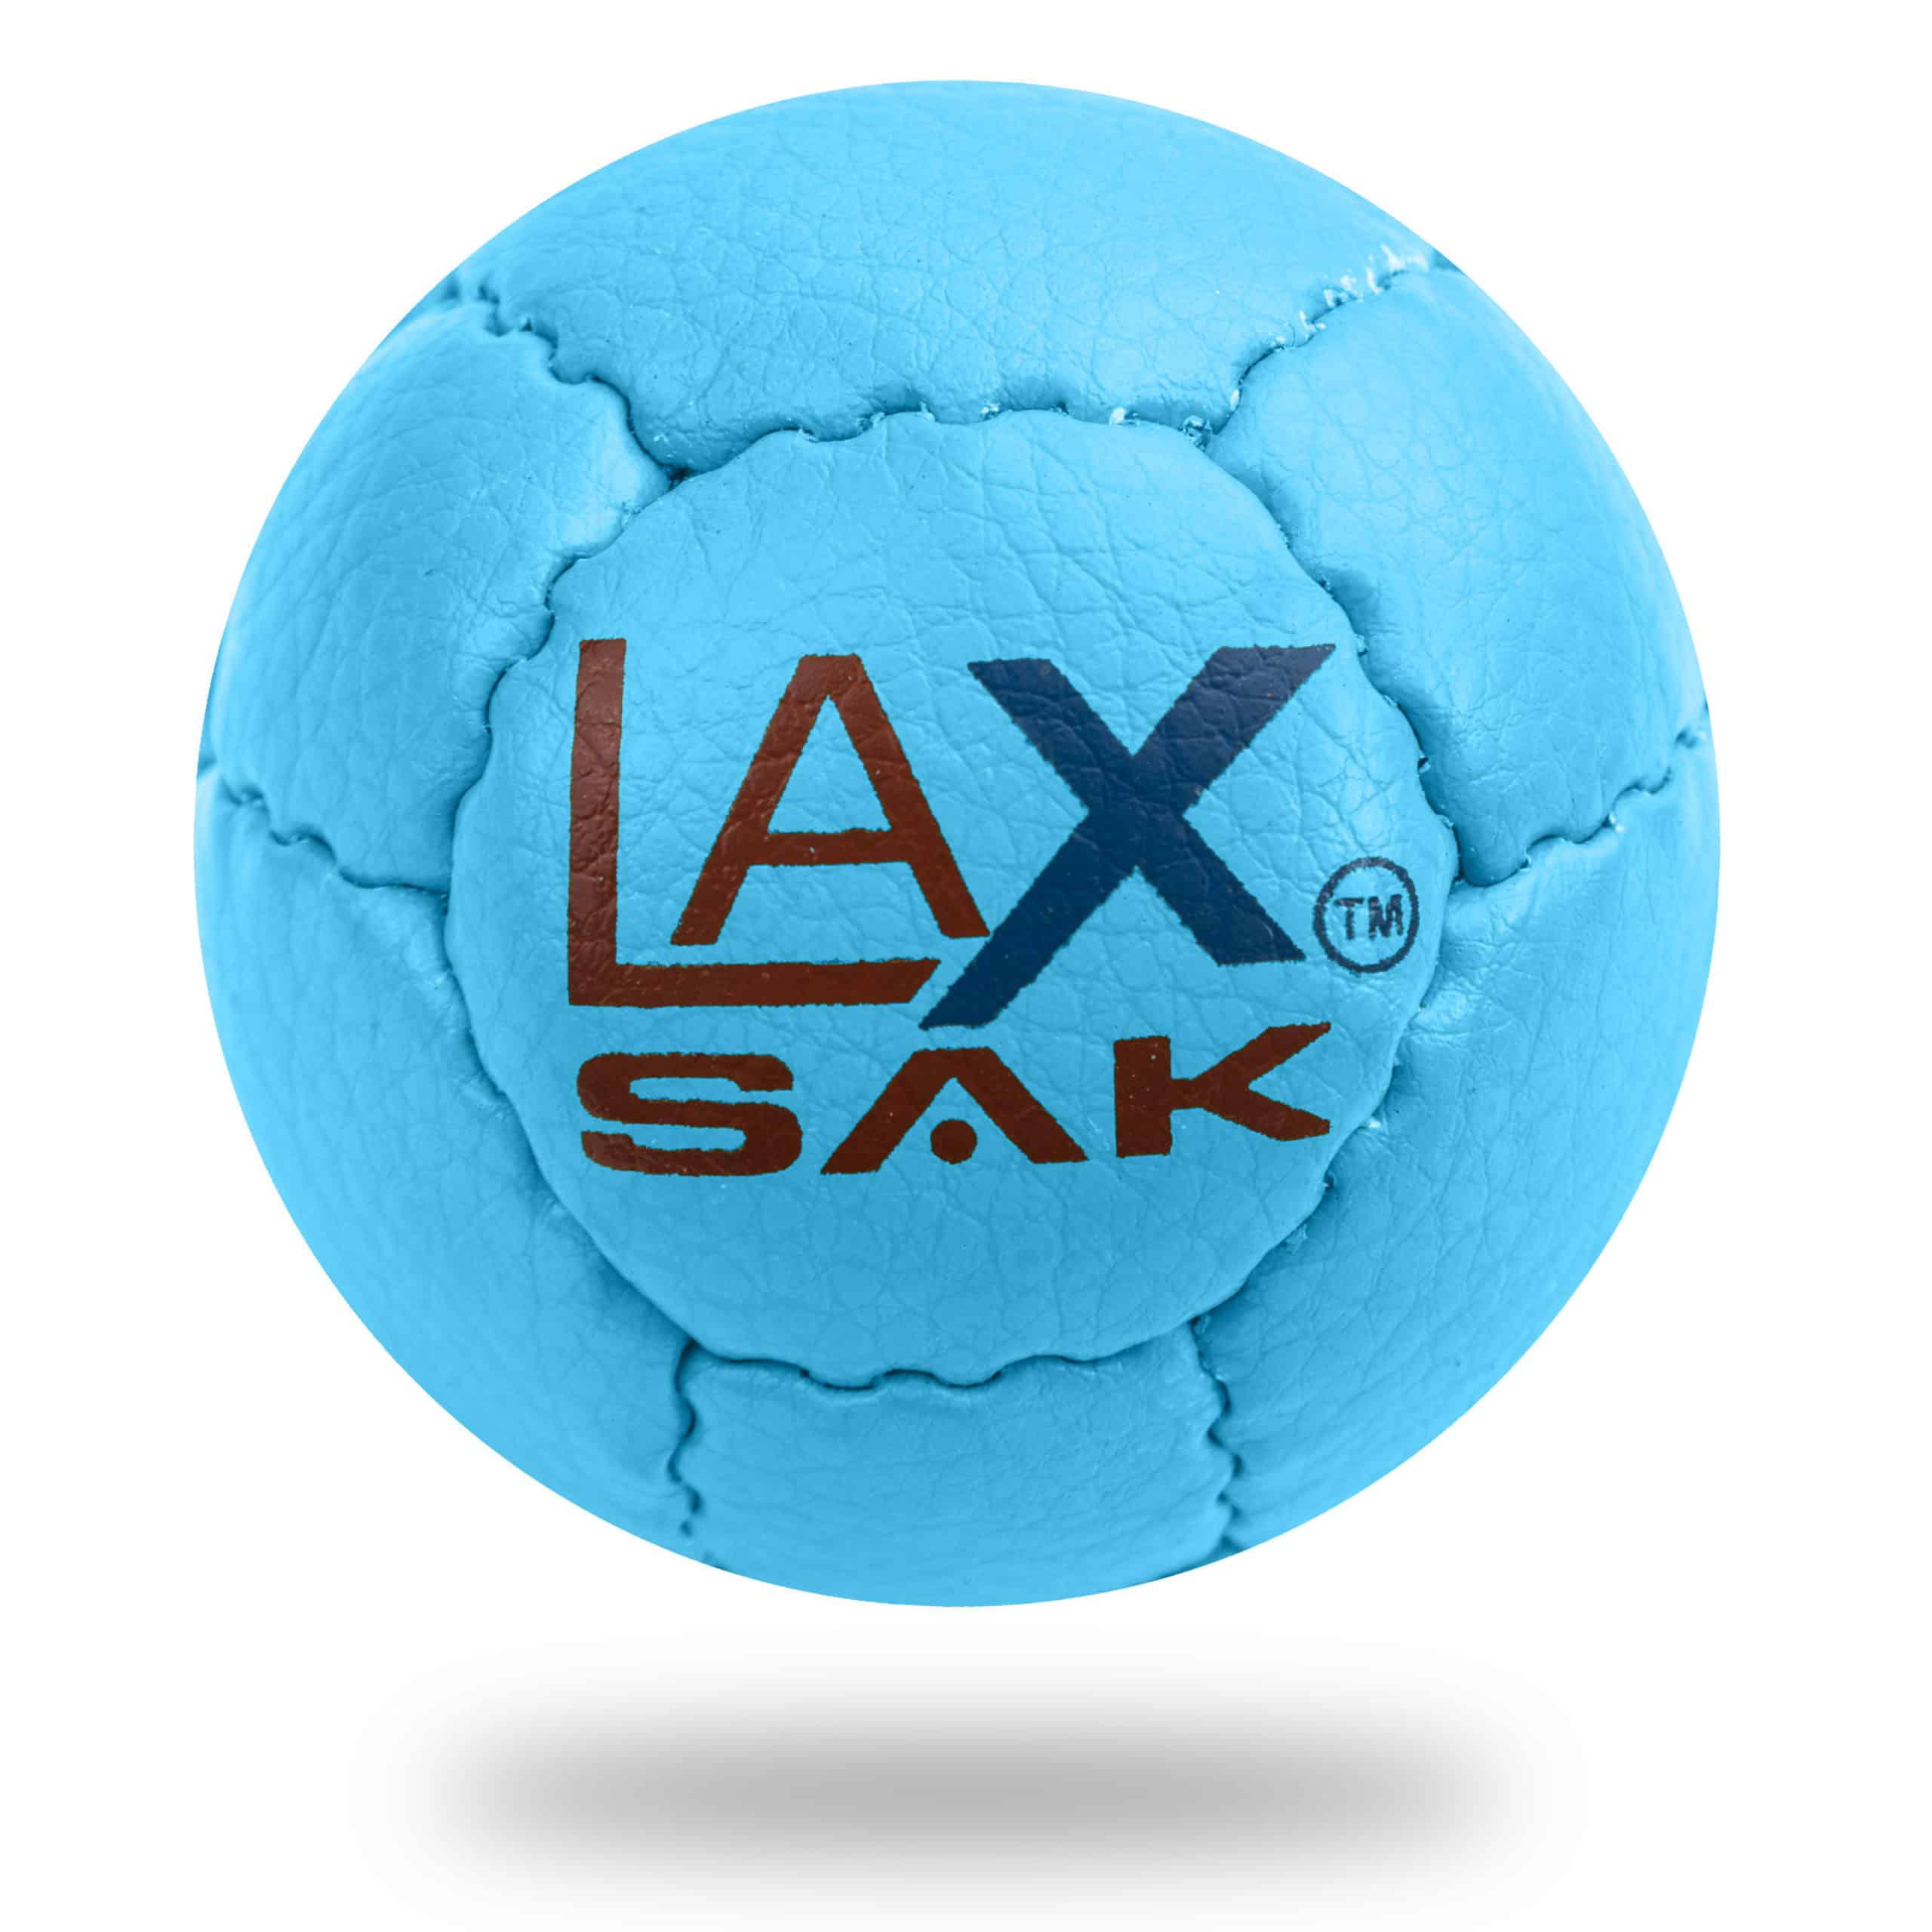 1 Pack Argyle Lacrosse Sak Lacrosse Training Ball Same Weight & Size as a Regulation Lacrosse Ball Great for Indoor & Outdoor Practice Less Bounce & Minimal Rebounds